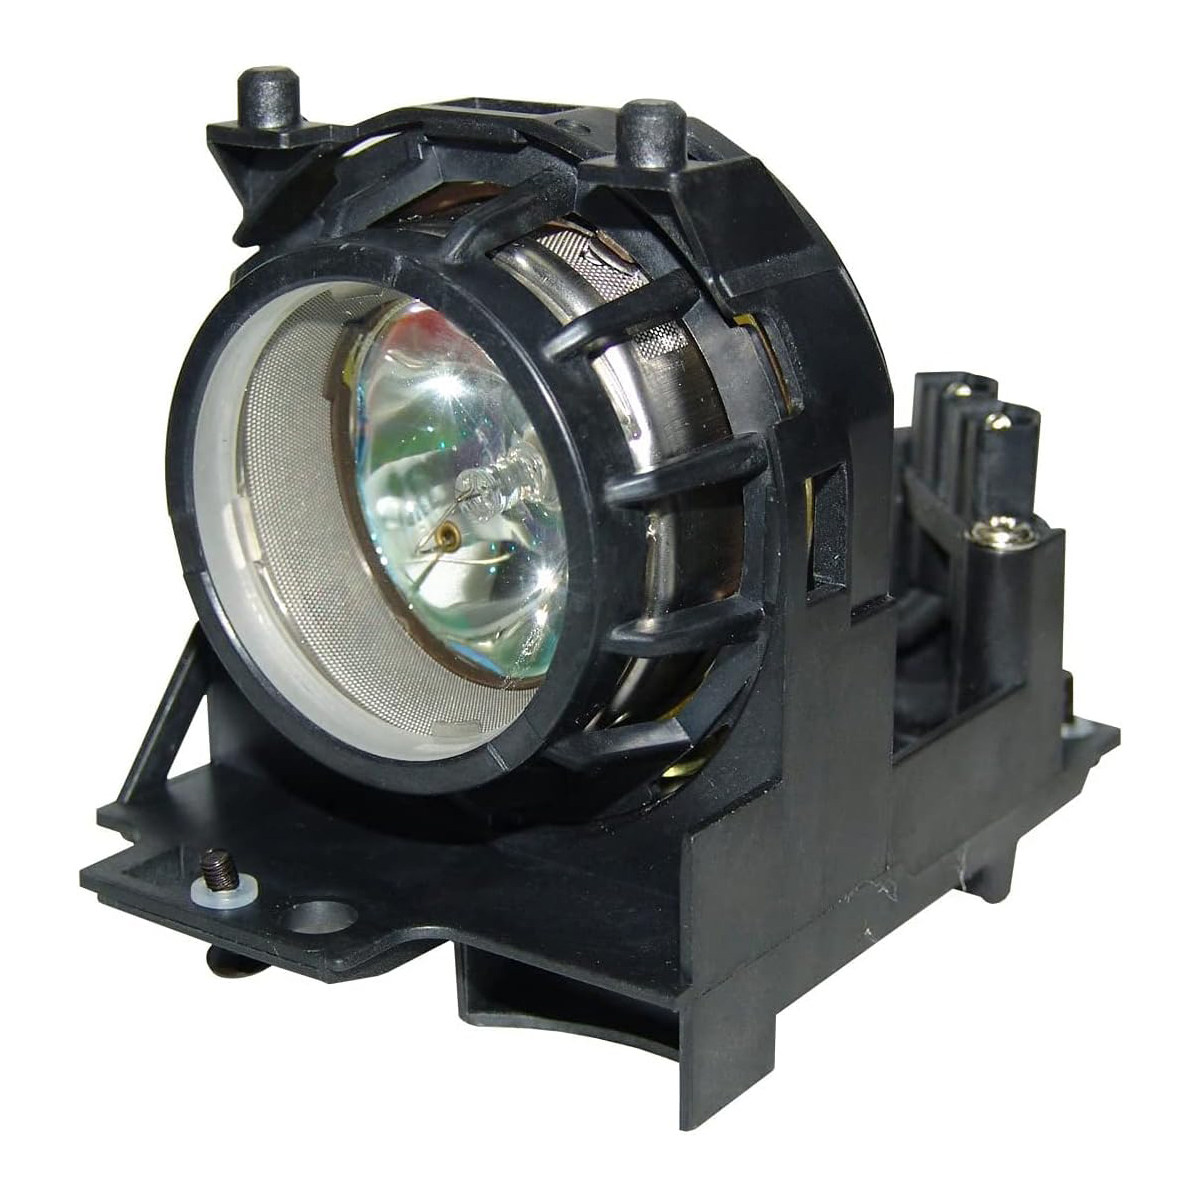 Replacement Projector lamp RLC-008 For VIEWSONIC PJ510